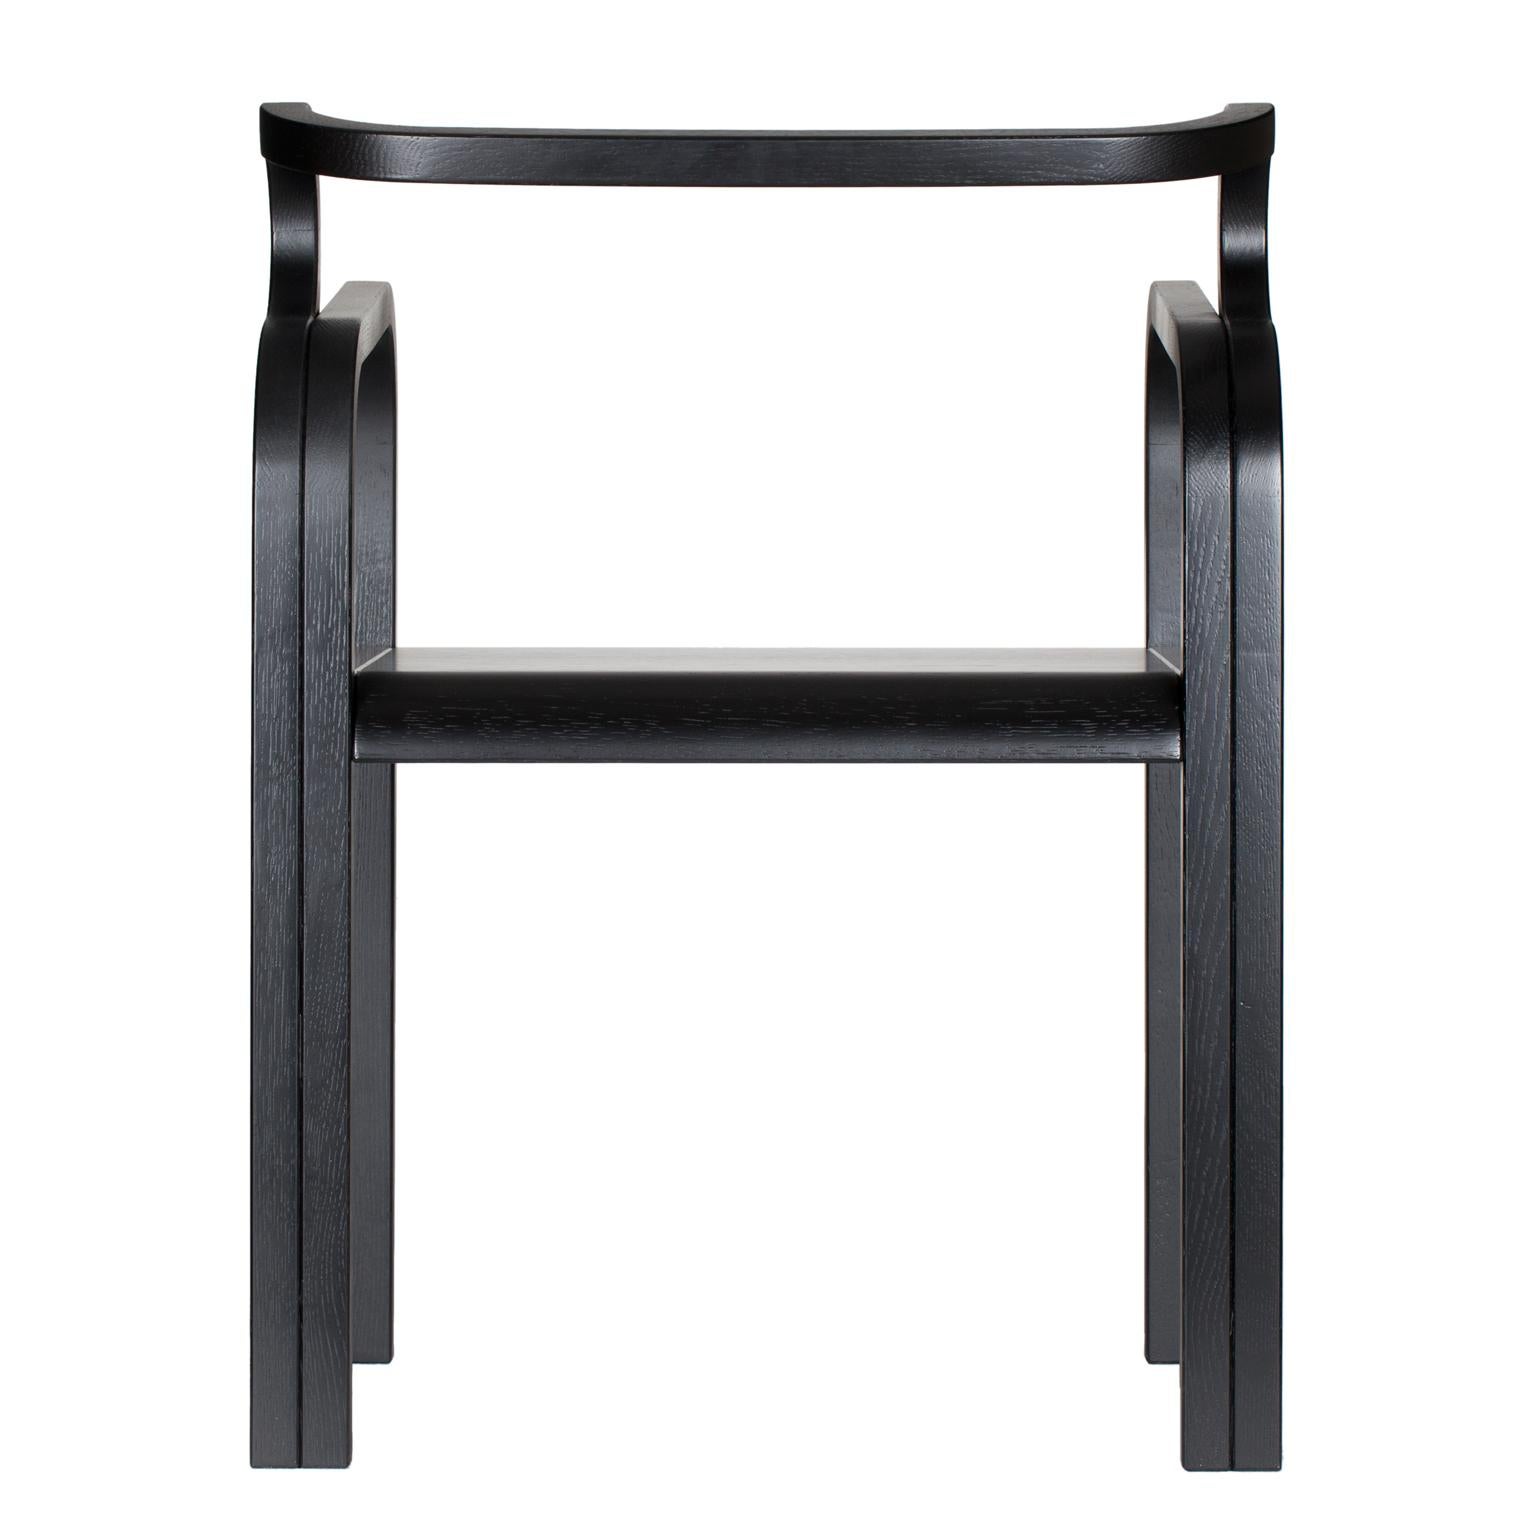 Odette Black Oak Chair by Fred and Juul
Dimensions: D 51 x W 58 x H 75 cm.
Materials: Oak.

Available in different oak finishes. Custom sizes, materials or finishes are available. Please contact us.

Odette elegantly shows that a wooden chair can